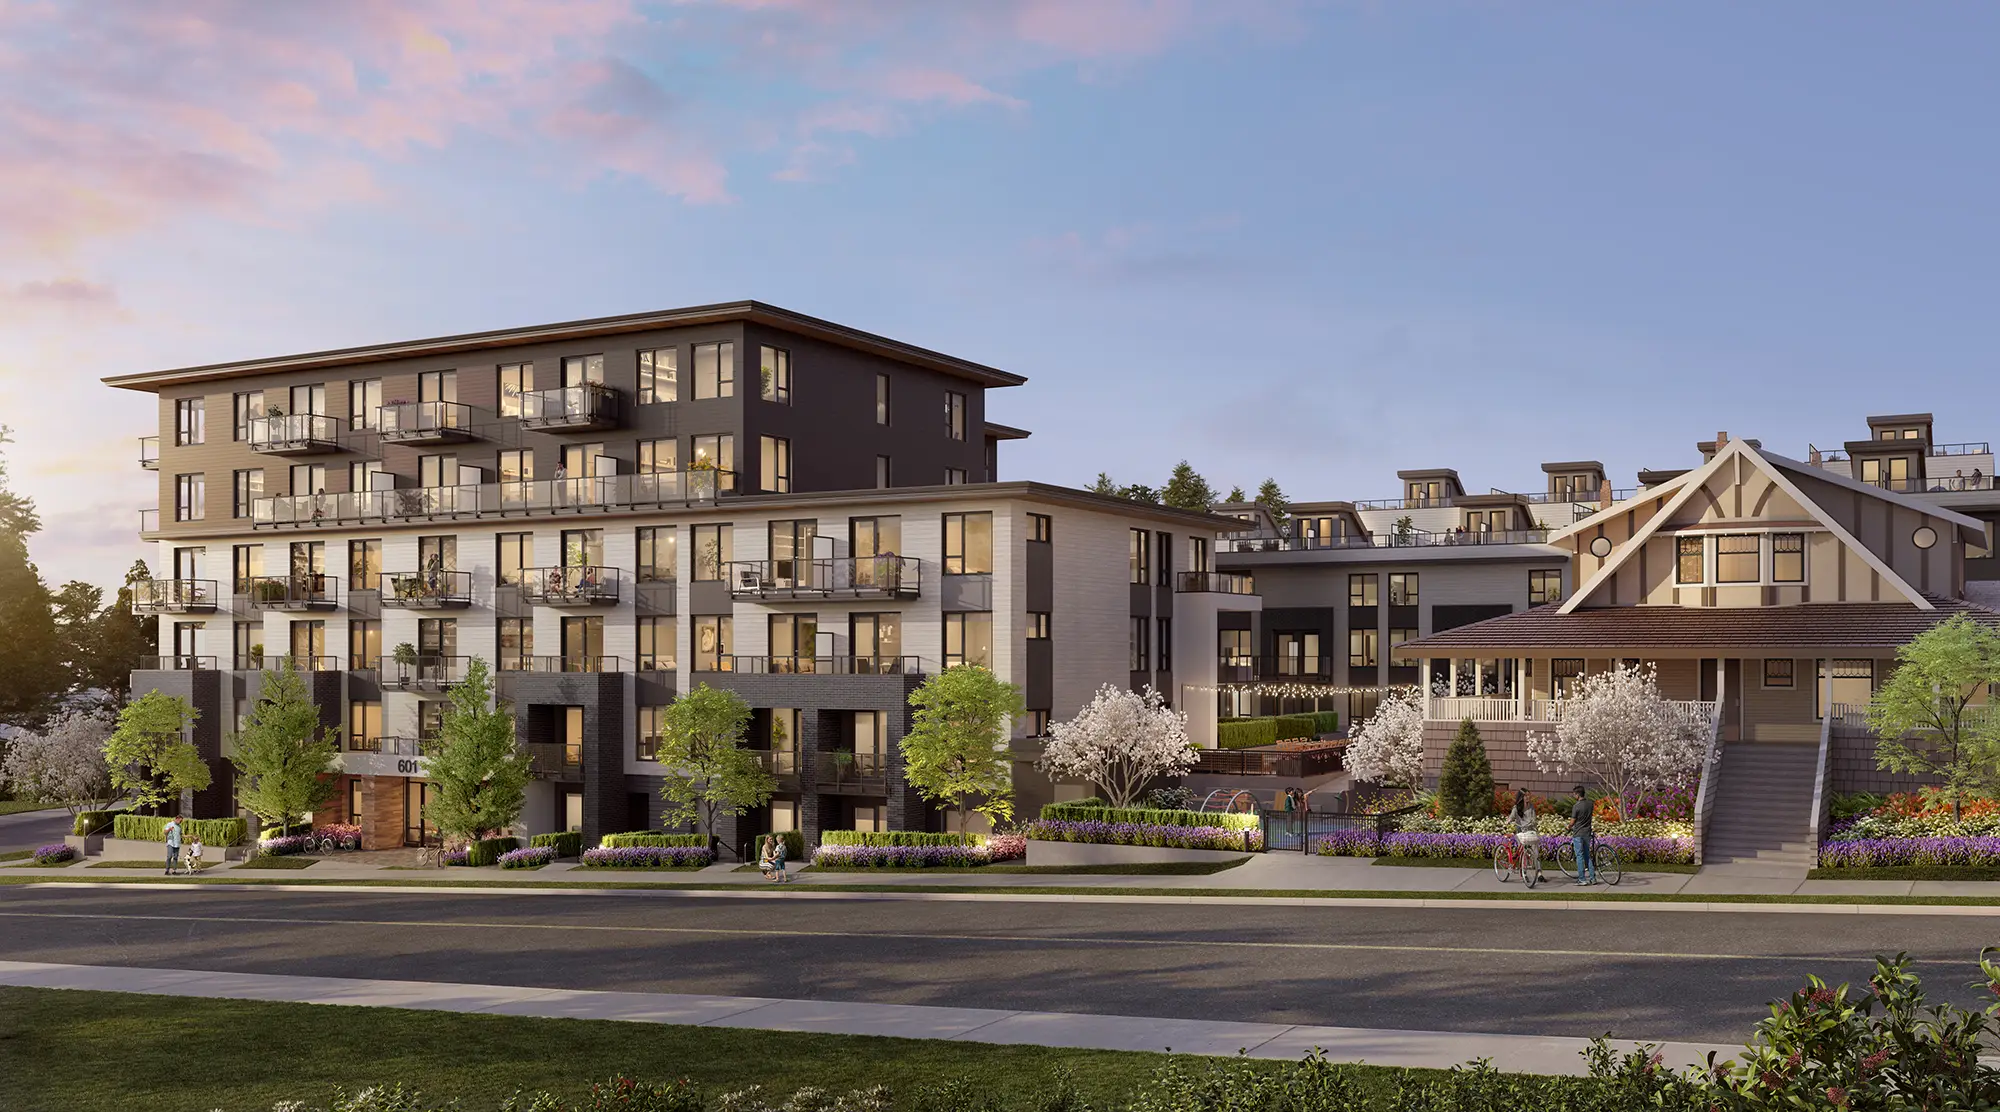 Lodana West Coquitlam is a mix of 123 condos, townhomes, and heritage house suites.